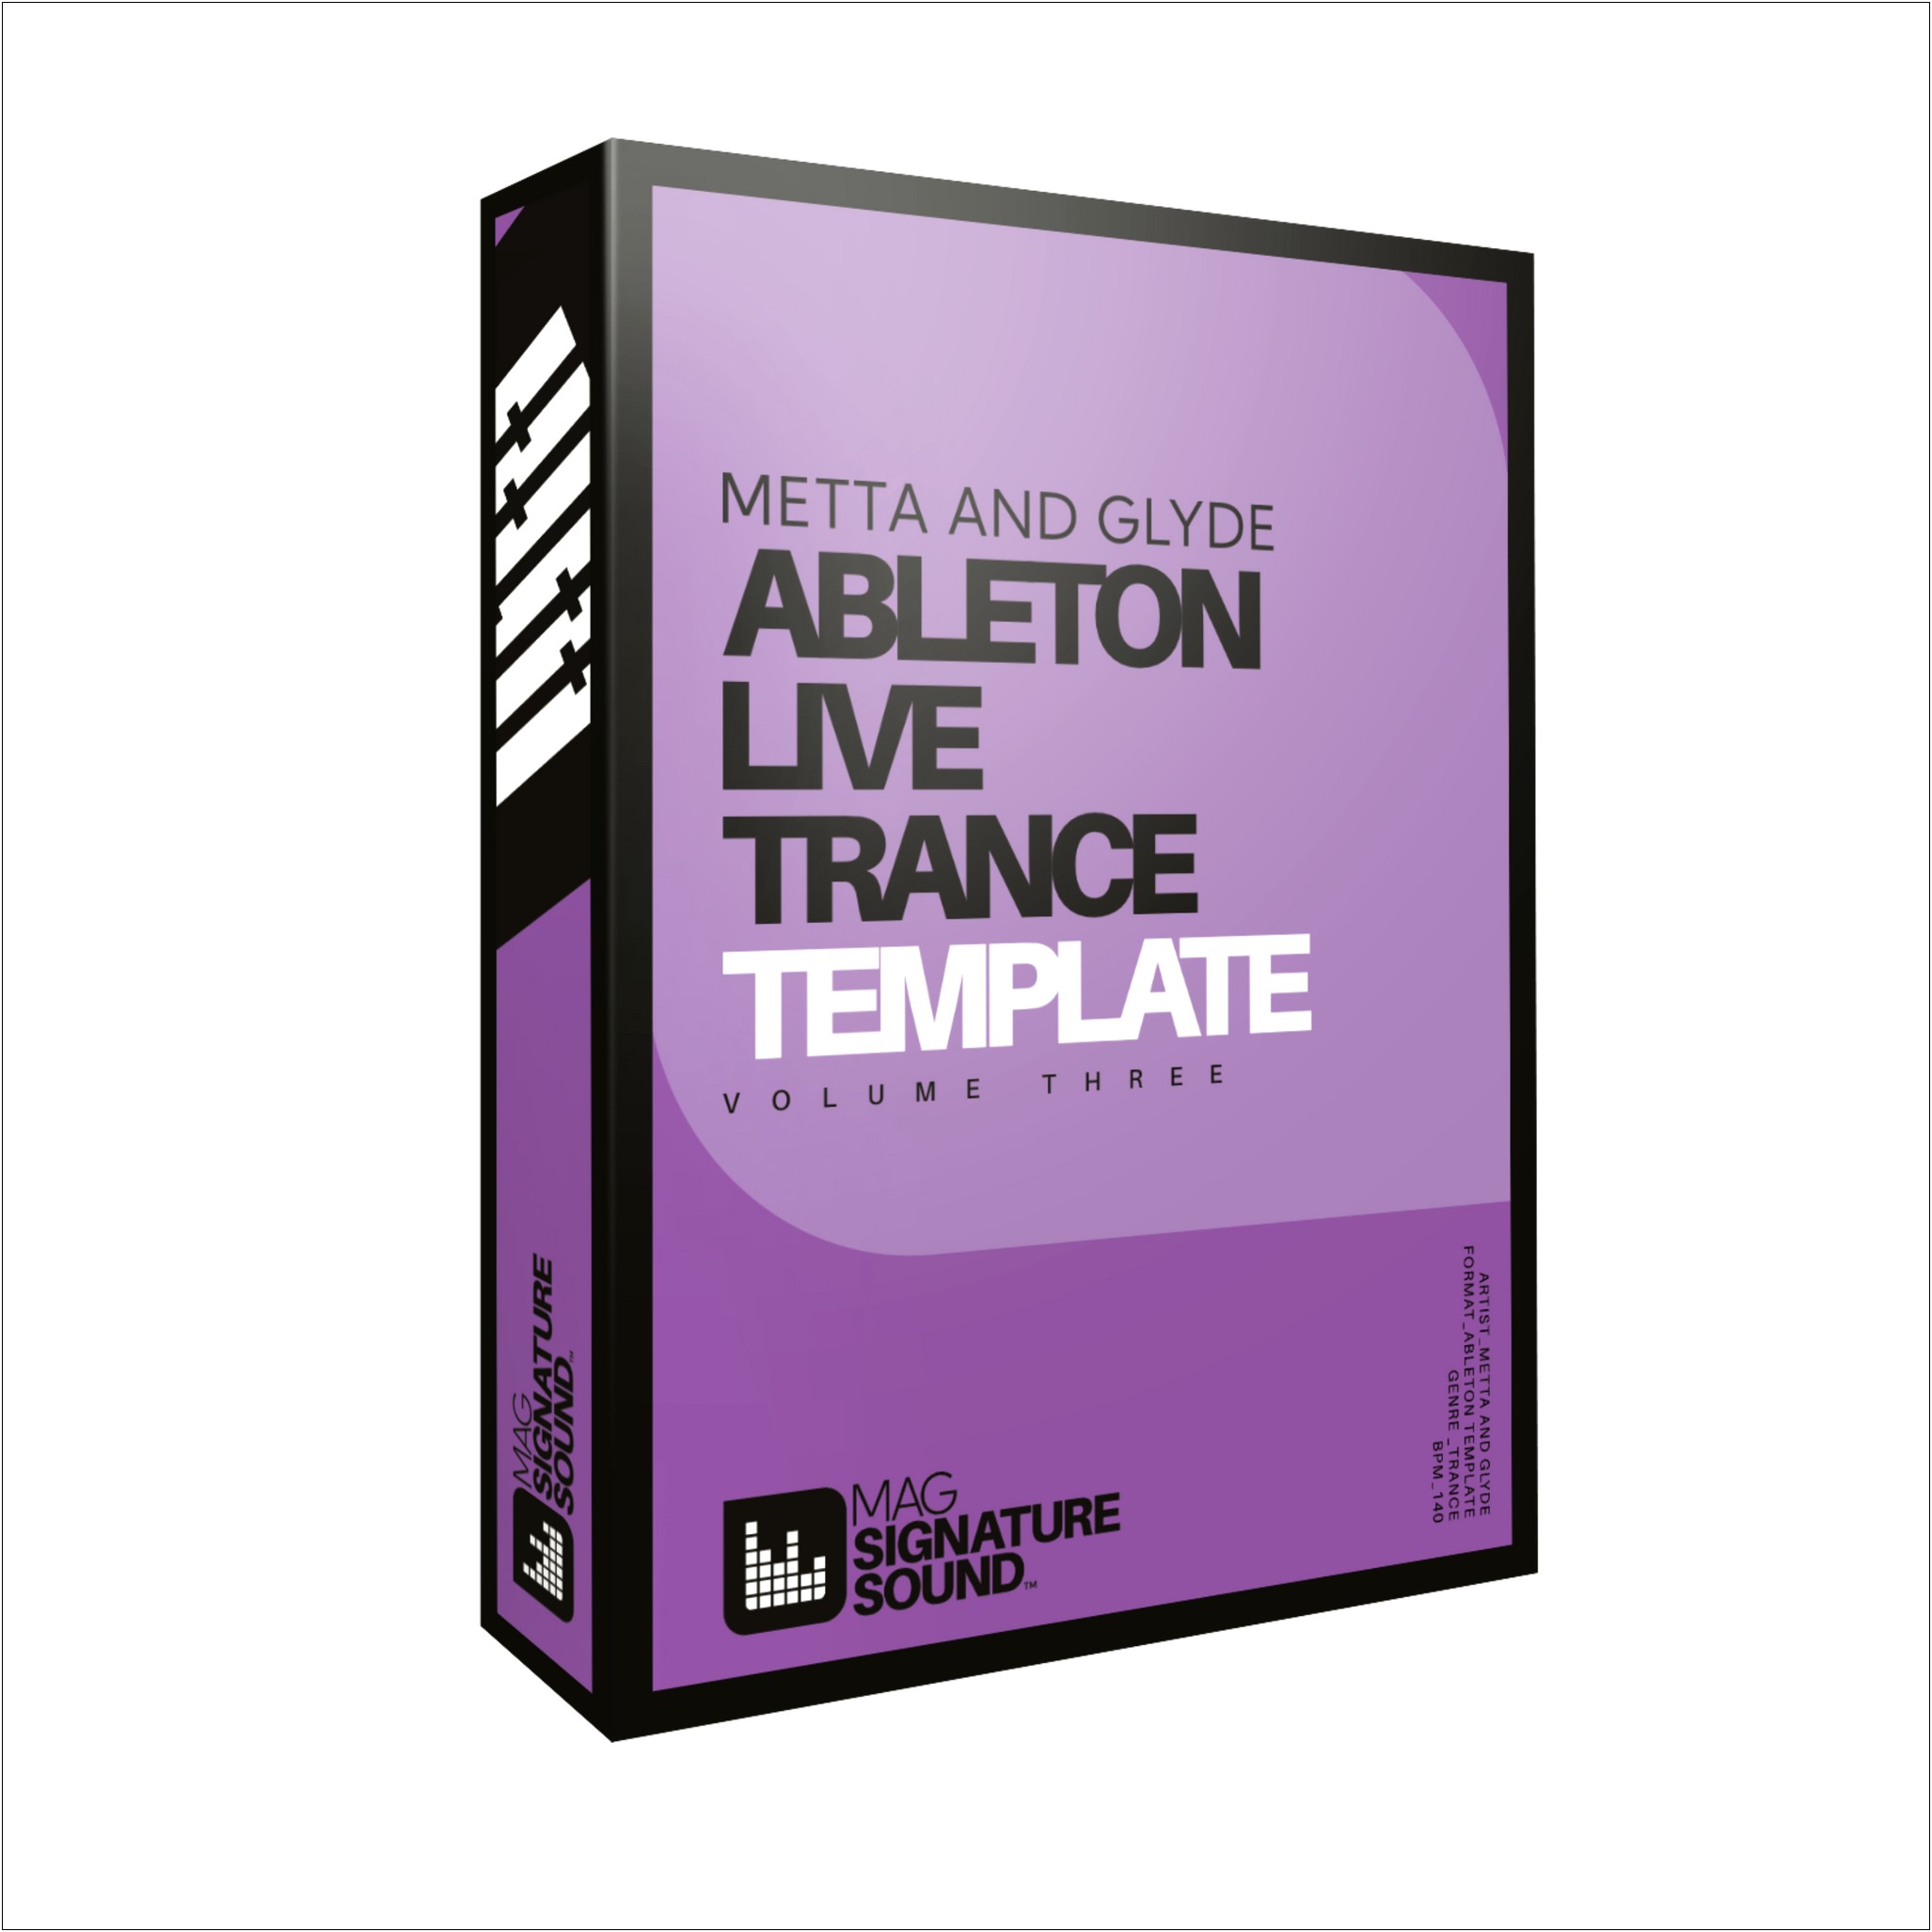 Free Ableton Live Uplifting Trance Template Ost Audio